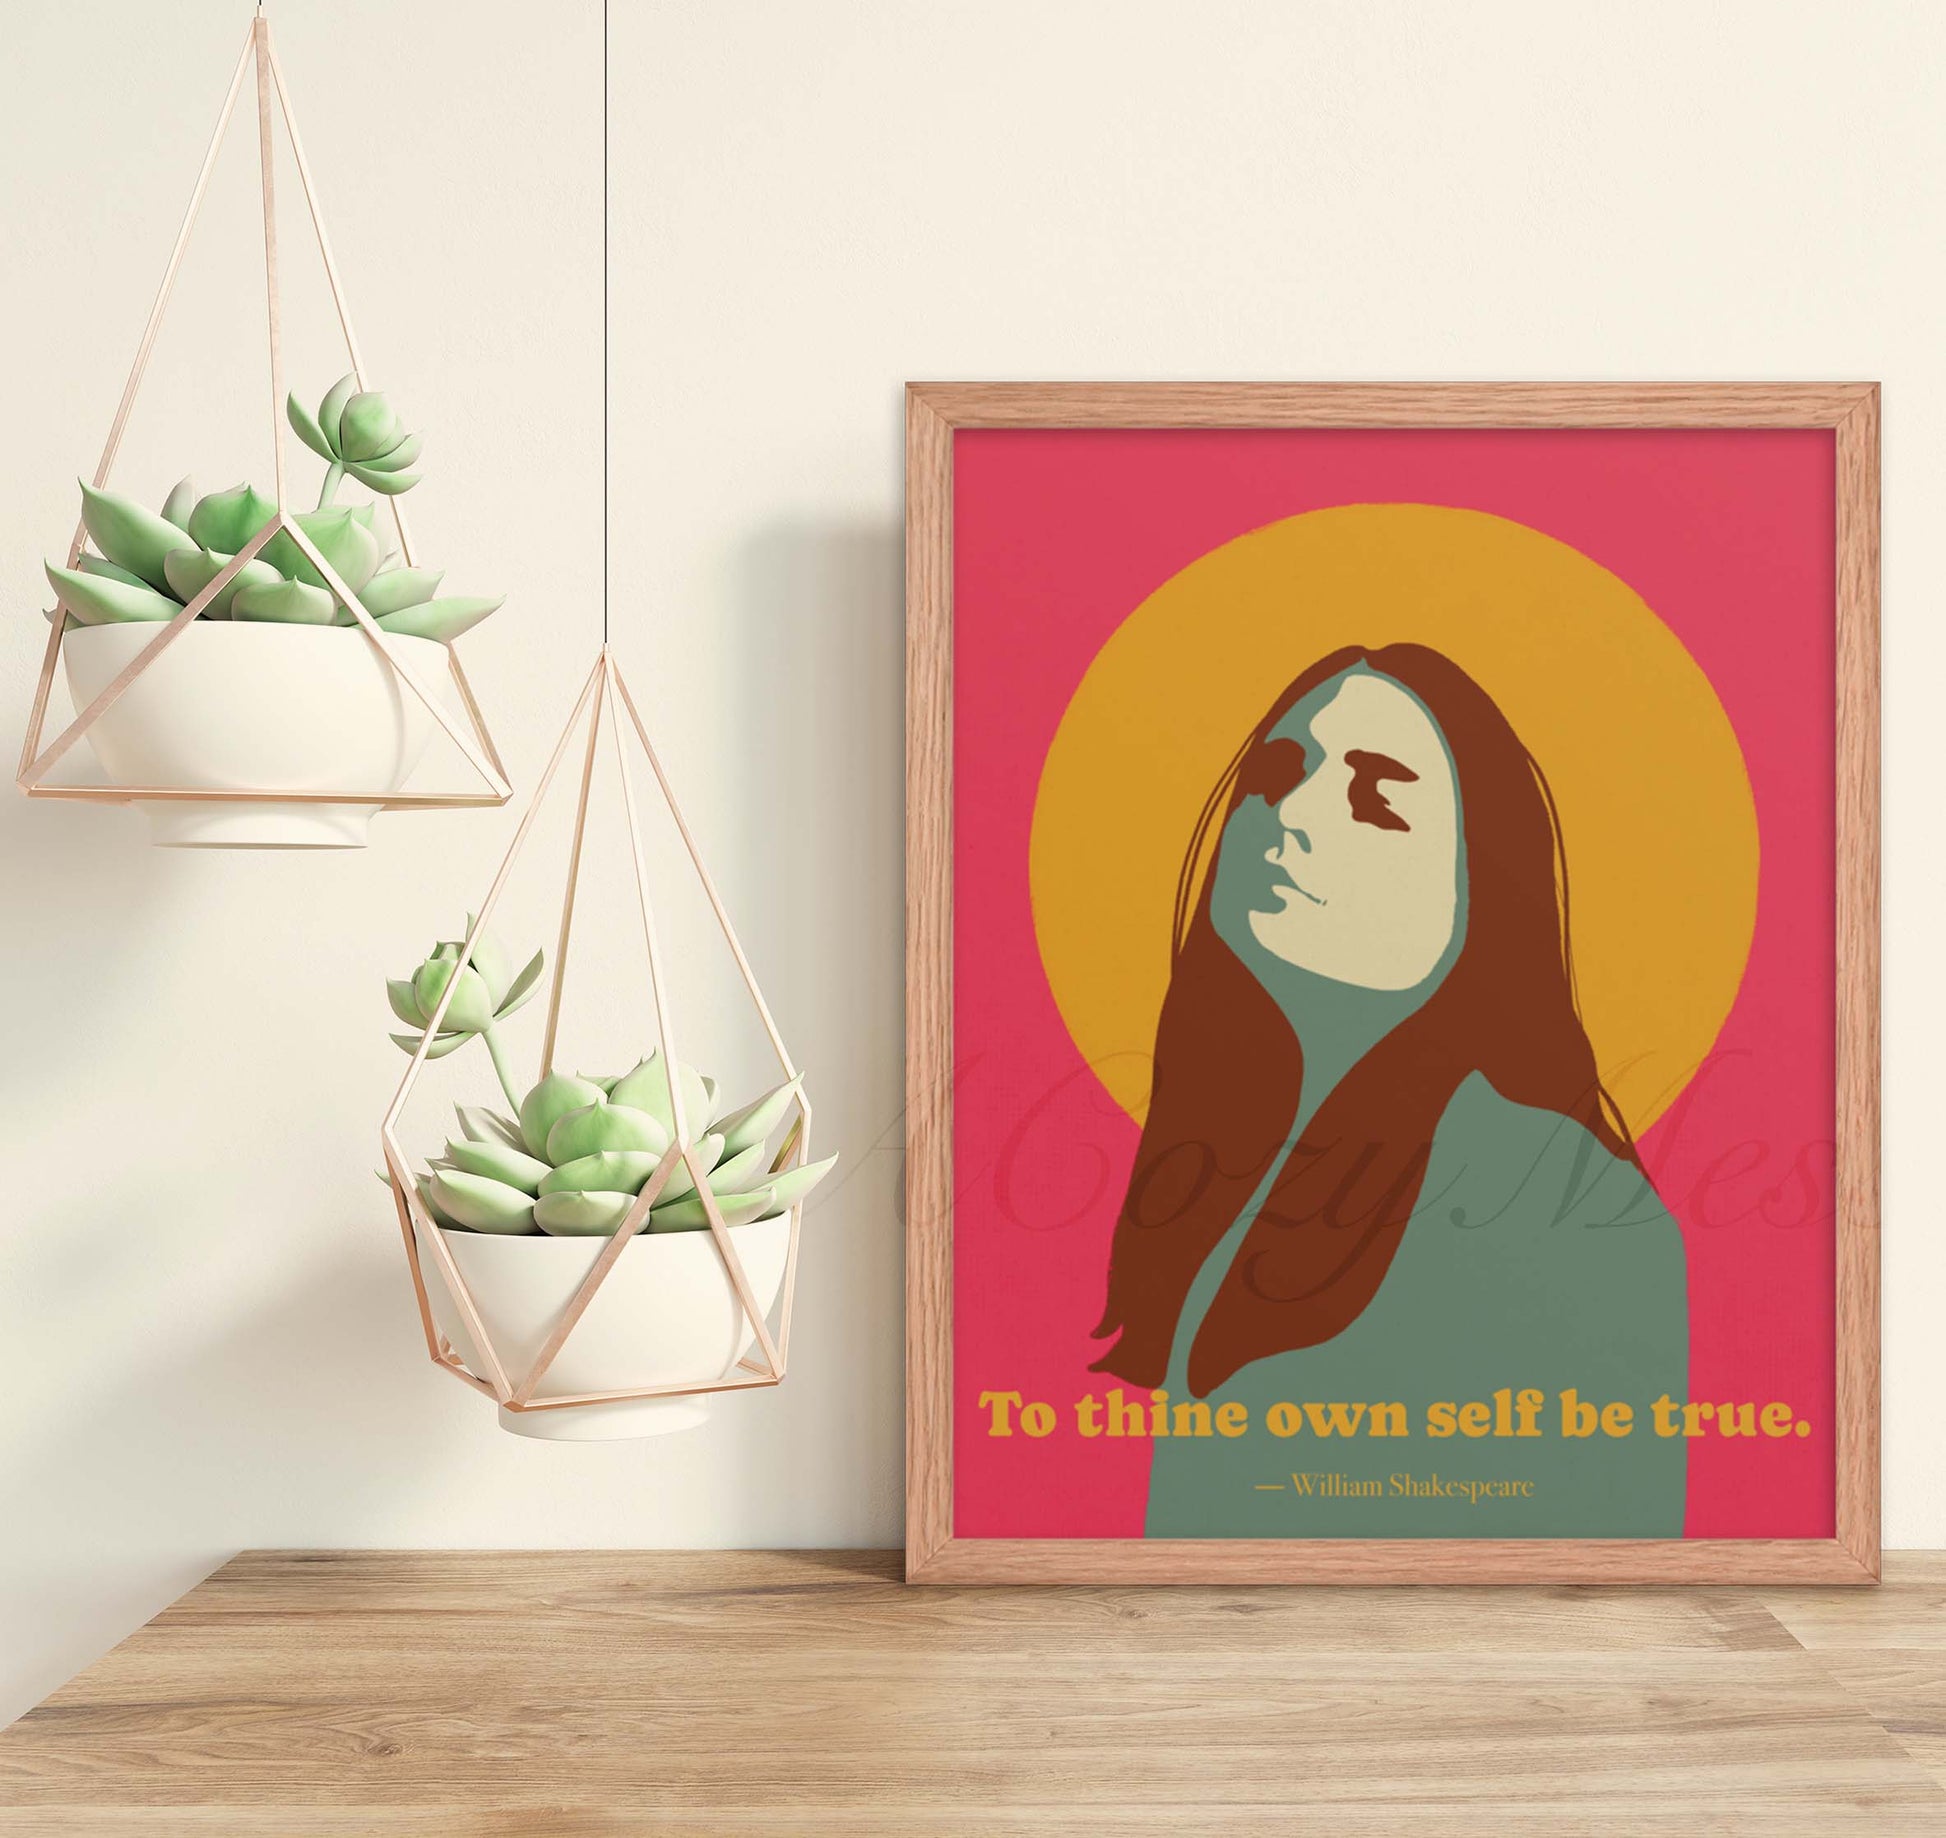 To Thine Own Self Be True quote by Shakespeare and women illustration in pink, brown & yellow on pink background in oak frame